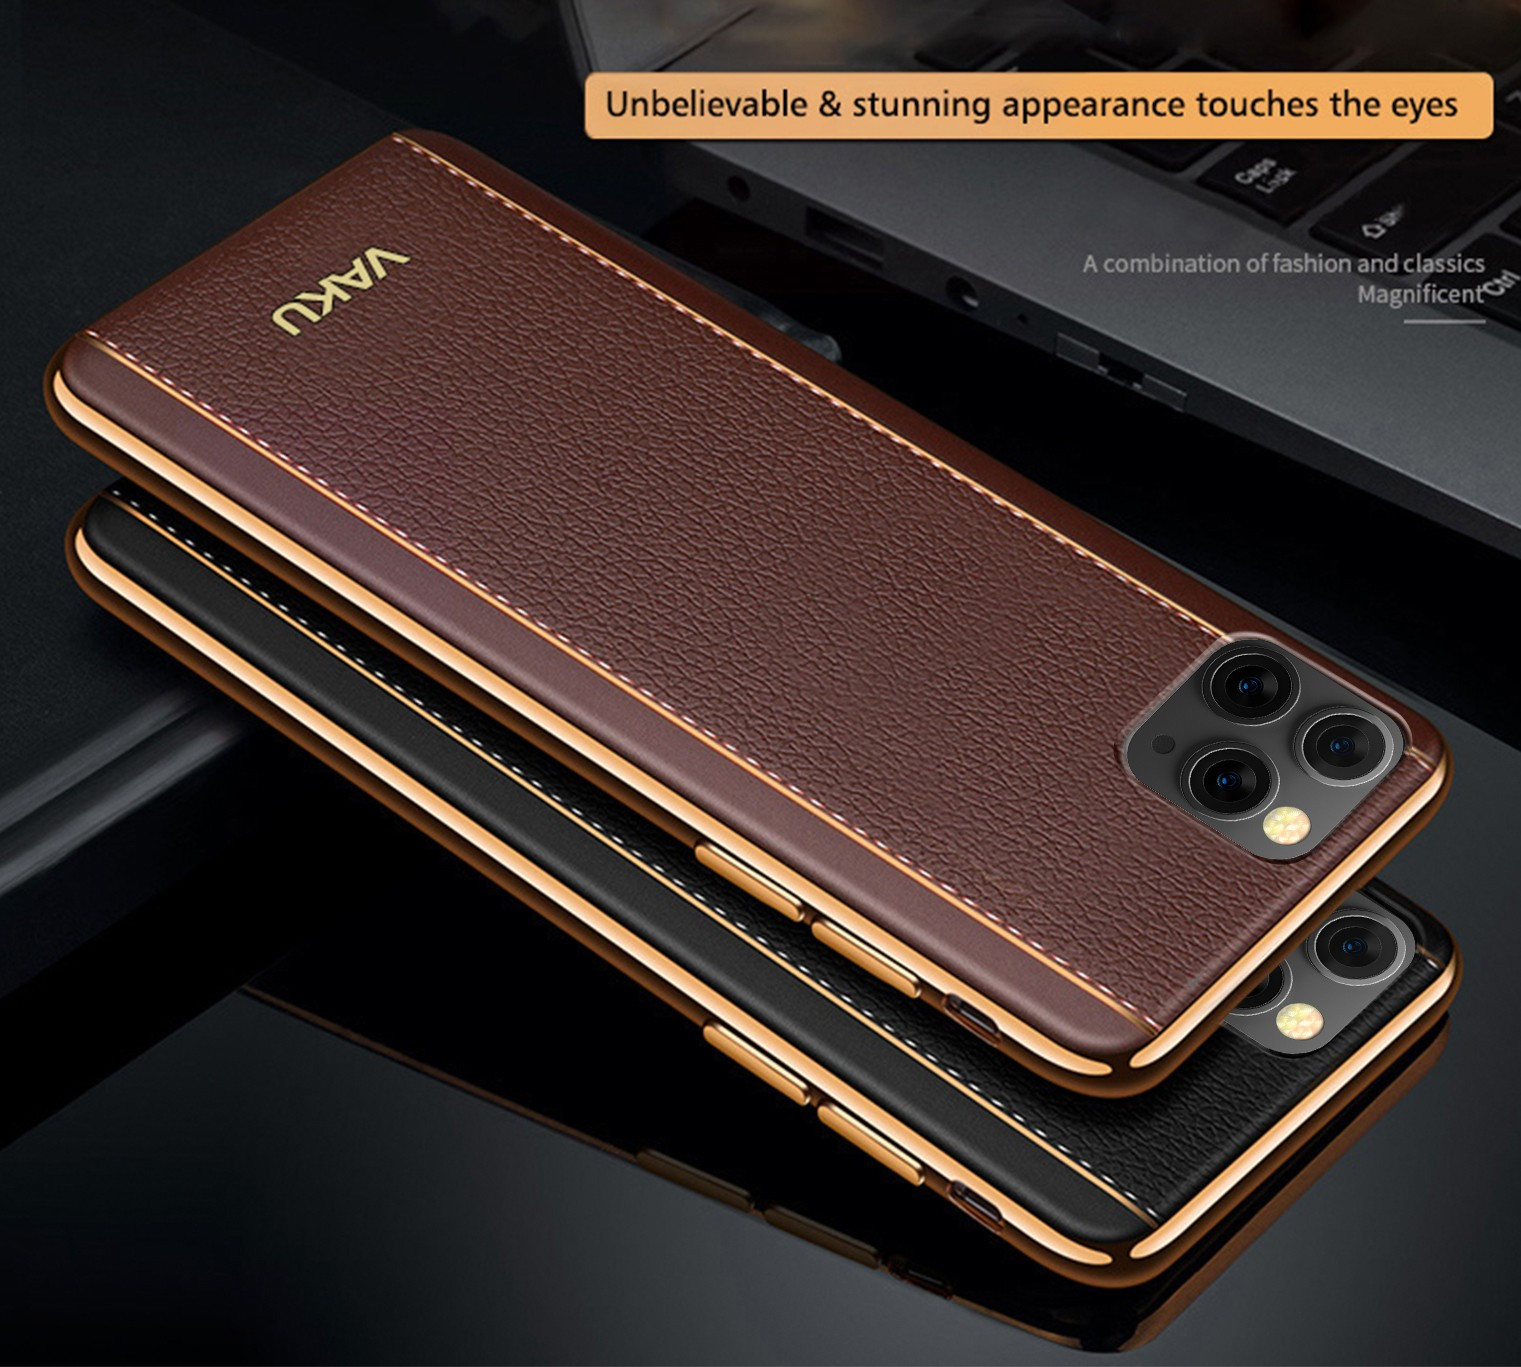 Vaku For Apple Iphone 11 Pro Max Vertical Leather Stitched Gold Electroplated Soft Tpu Back Cover Iphone 11 Pro Max Apple Mobile Tablet Screen Guards India